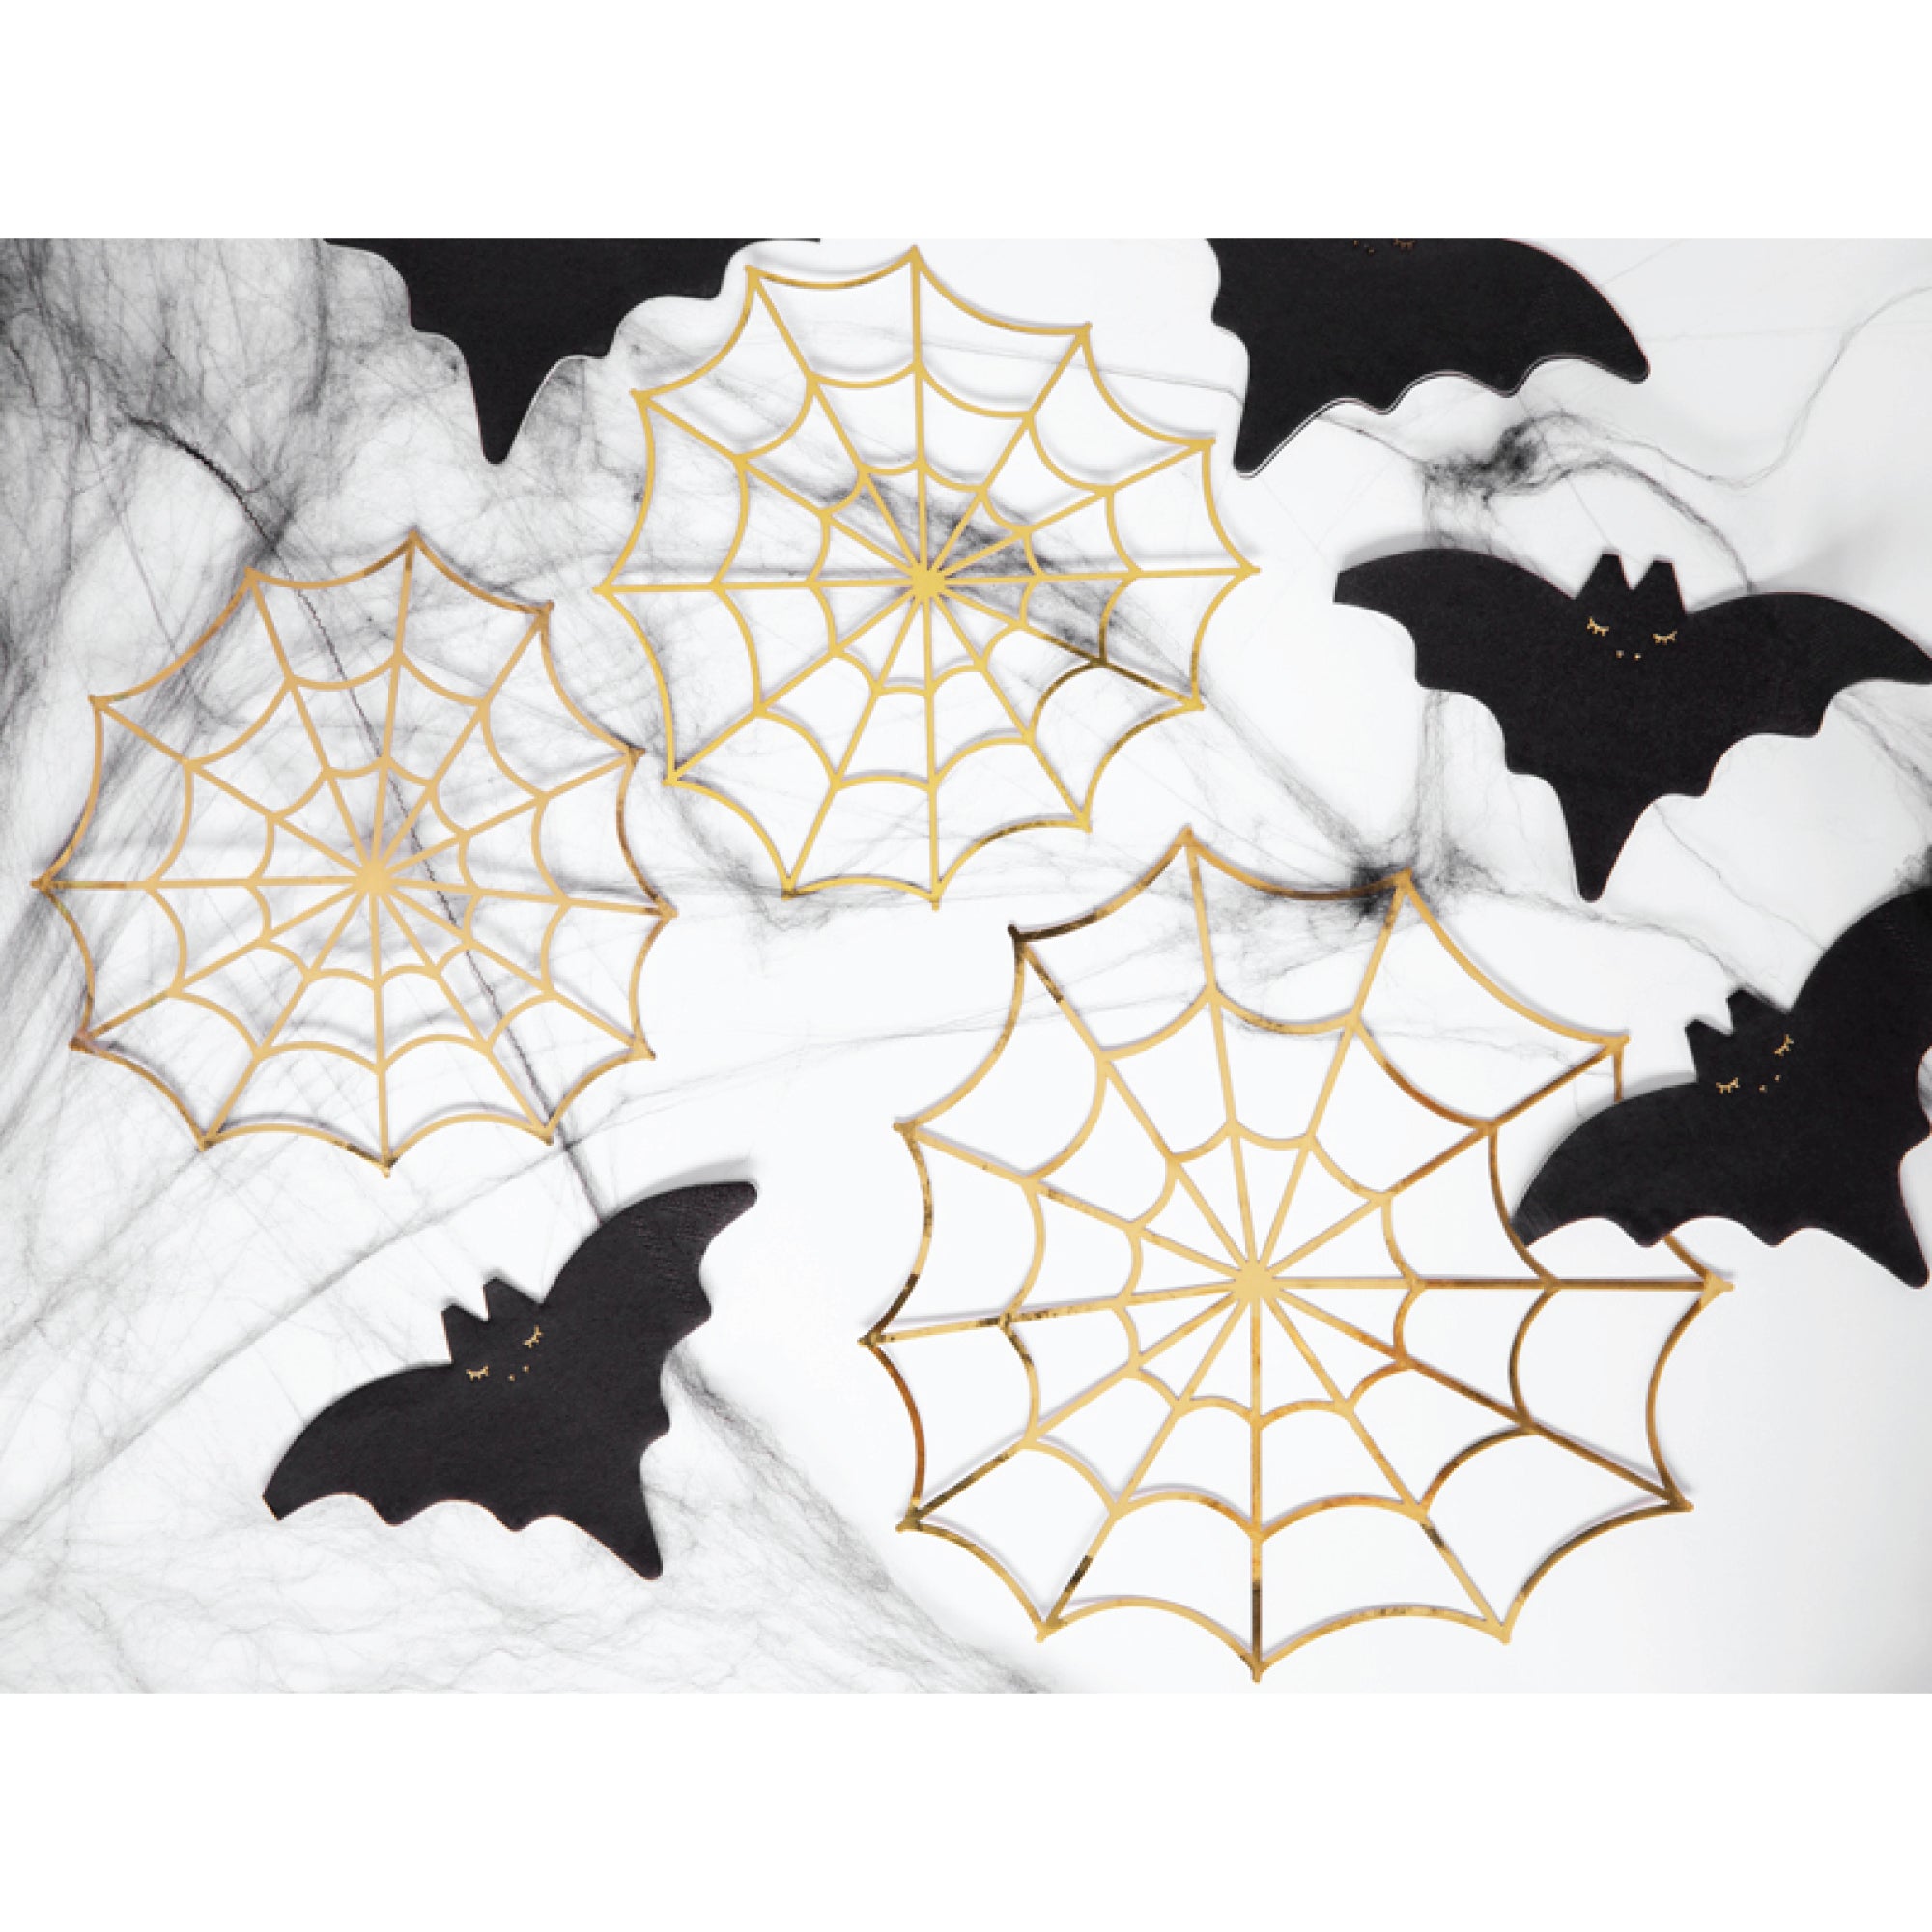 Gold Spiderweb Paper Decorations 3ct | The Party Darling